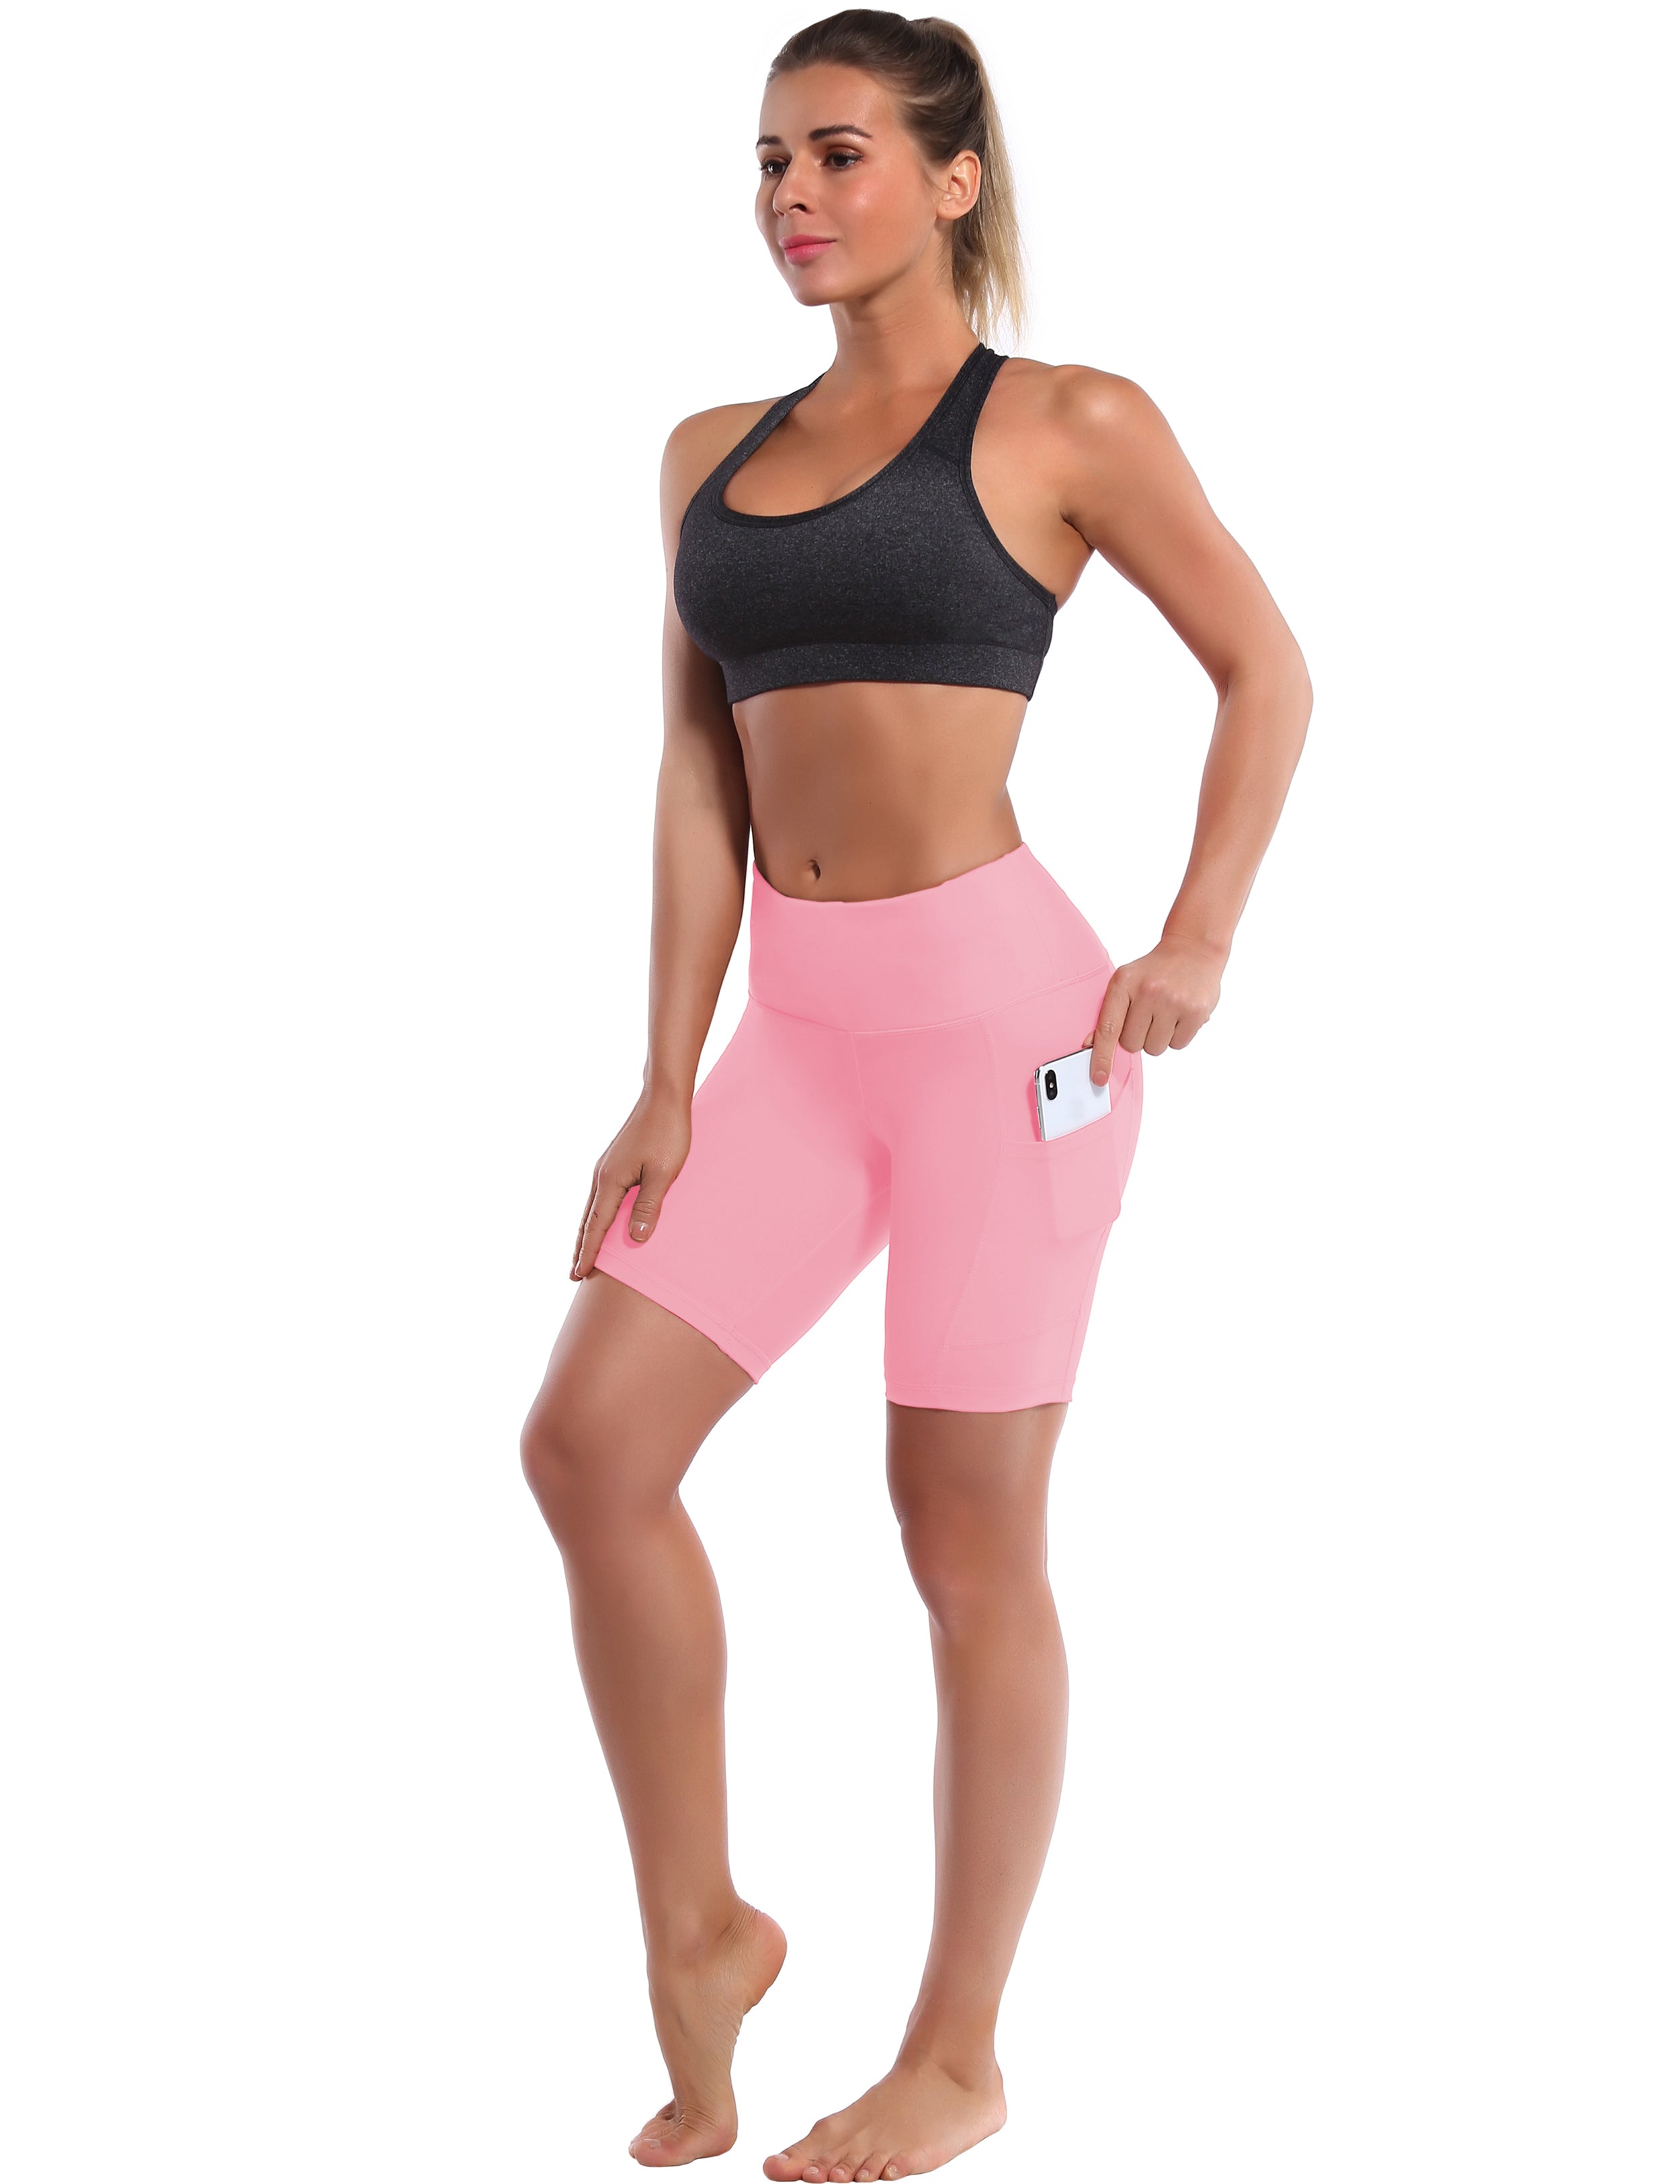 8" Side Pockets yogastudio Shorts lemonadepink Sleek, soft, smooth and totally comfortable: our newest style is here. Softest-ever fabric High elasticity High density 4-way stretch Fabric doesn't attract lint easily No see-through Moisture-wicking Machine wash 75% Nylon, 25% Spandex